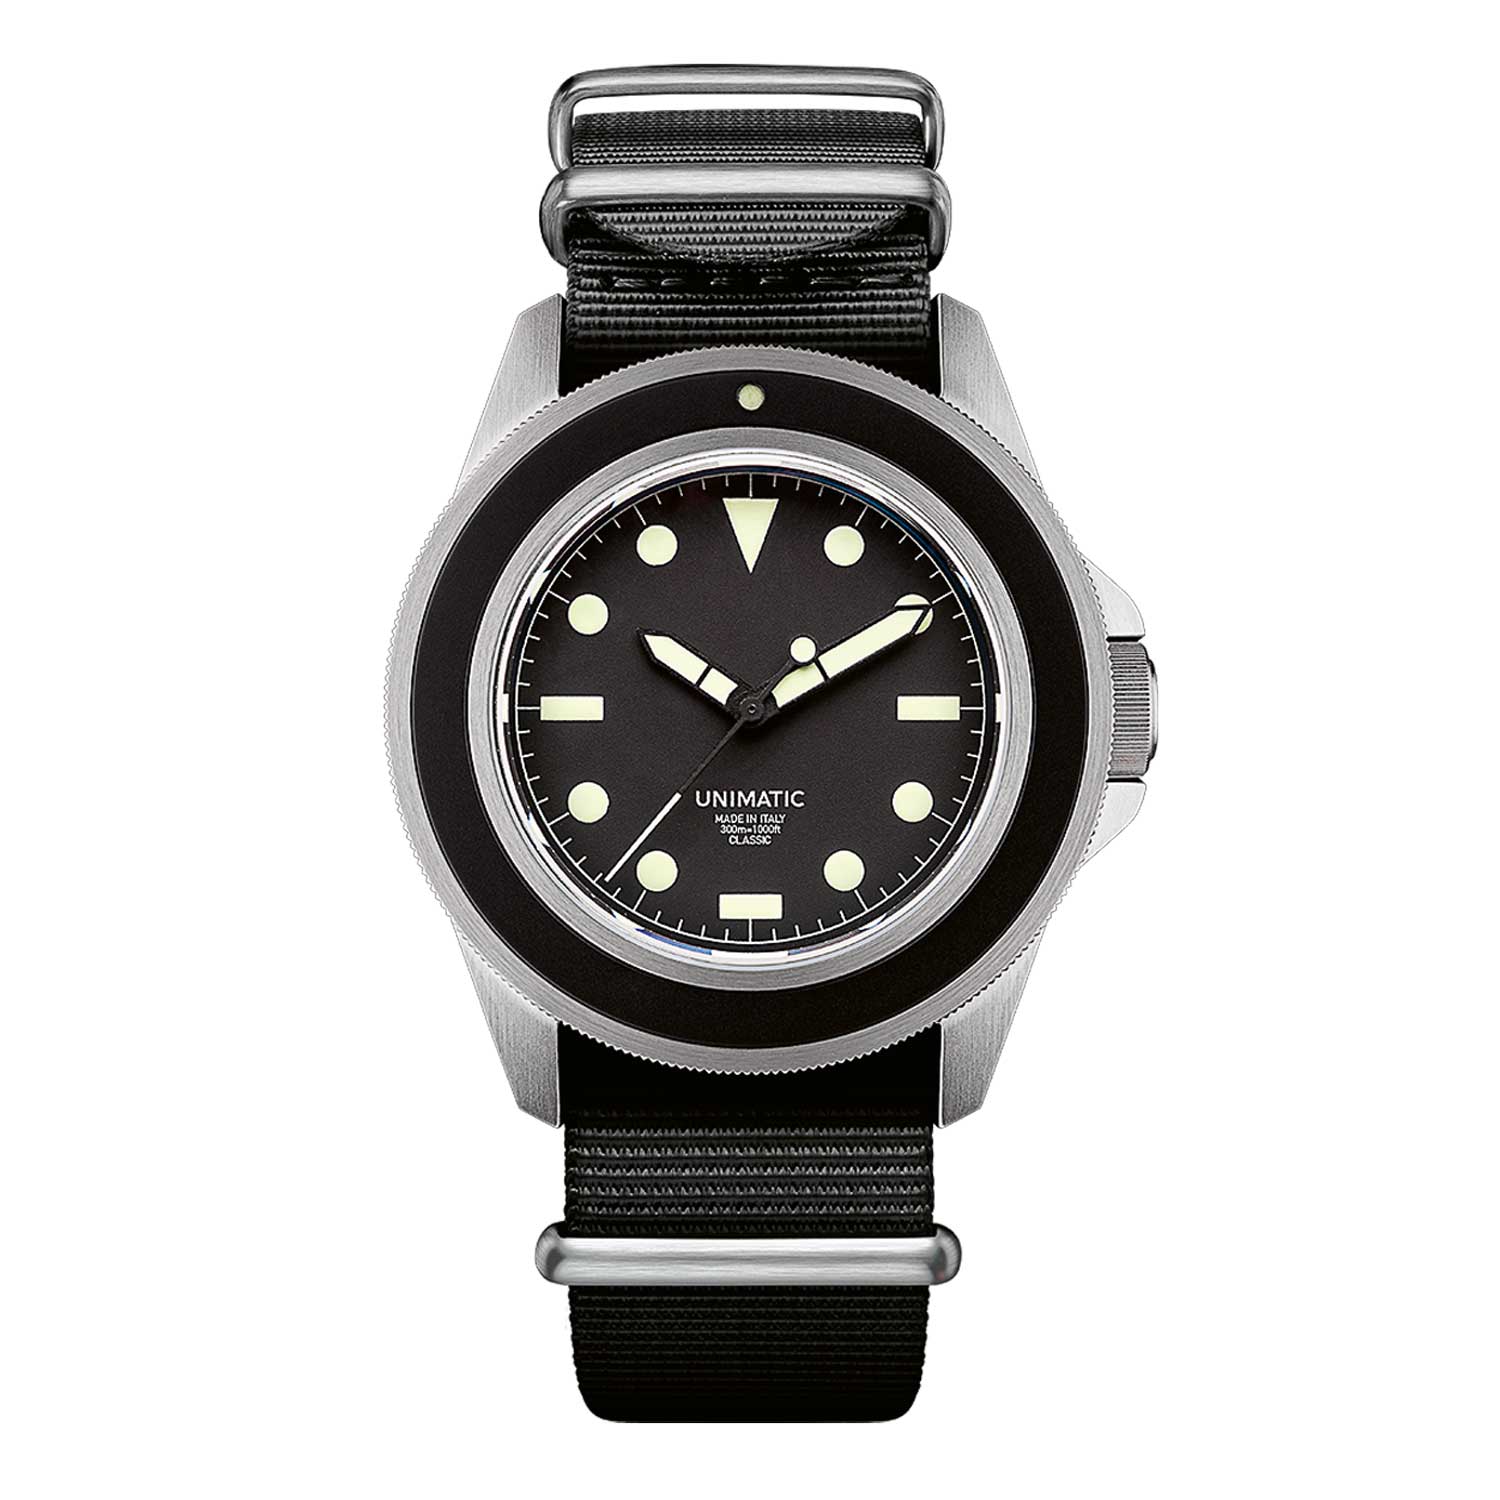 Unimatic’s regular production Modello Uno or U1 dive watch from the Classic series